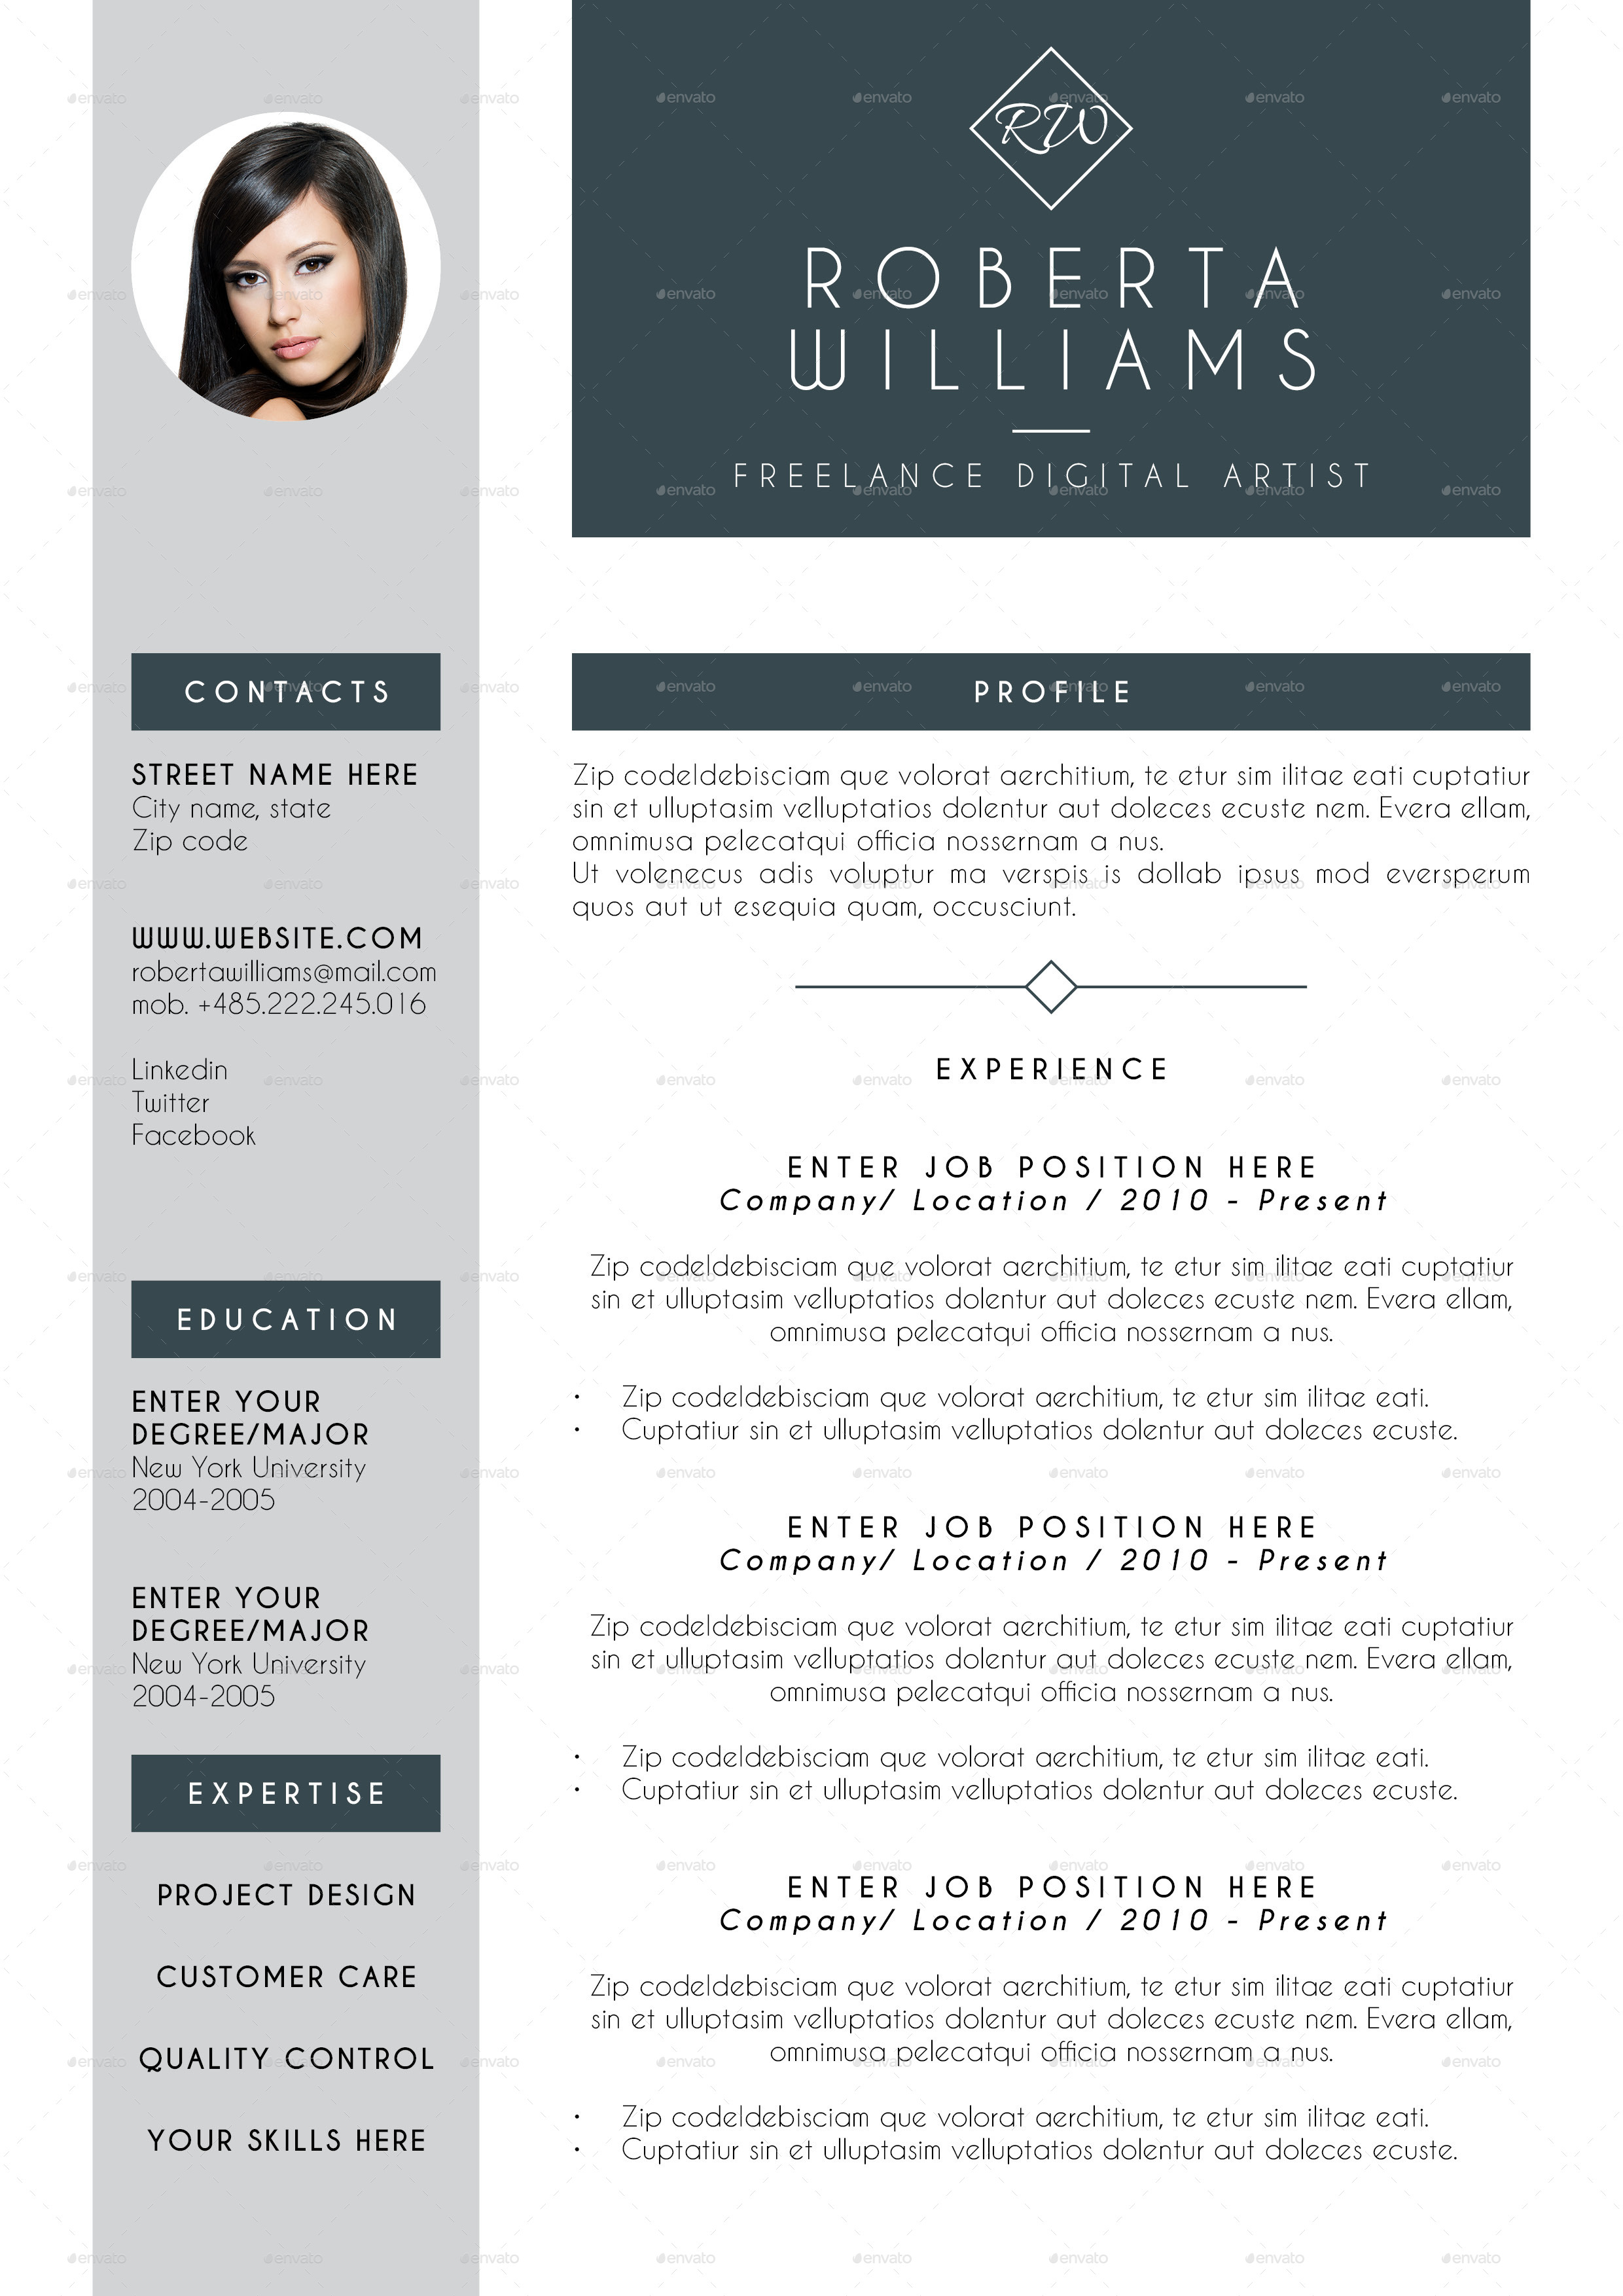 8 PDF CURRICULUM VITAE TEMPLATE PAGES FREE PRINTABLE DOCX DOWNLOAD 